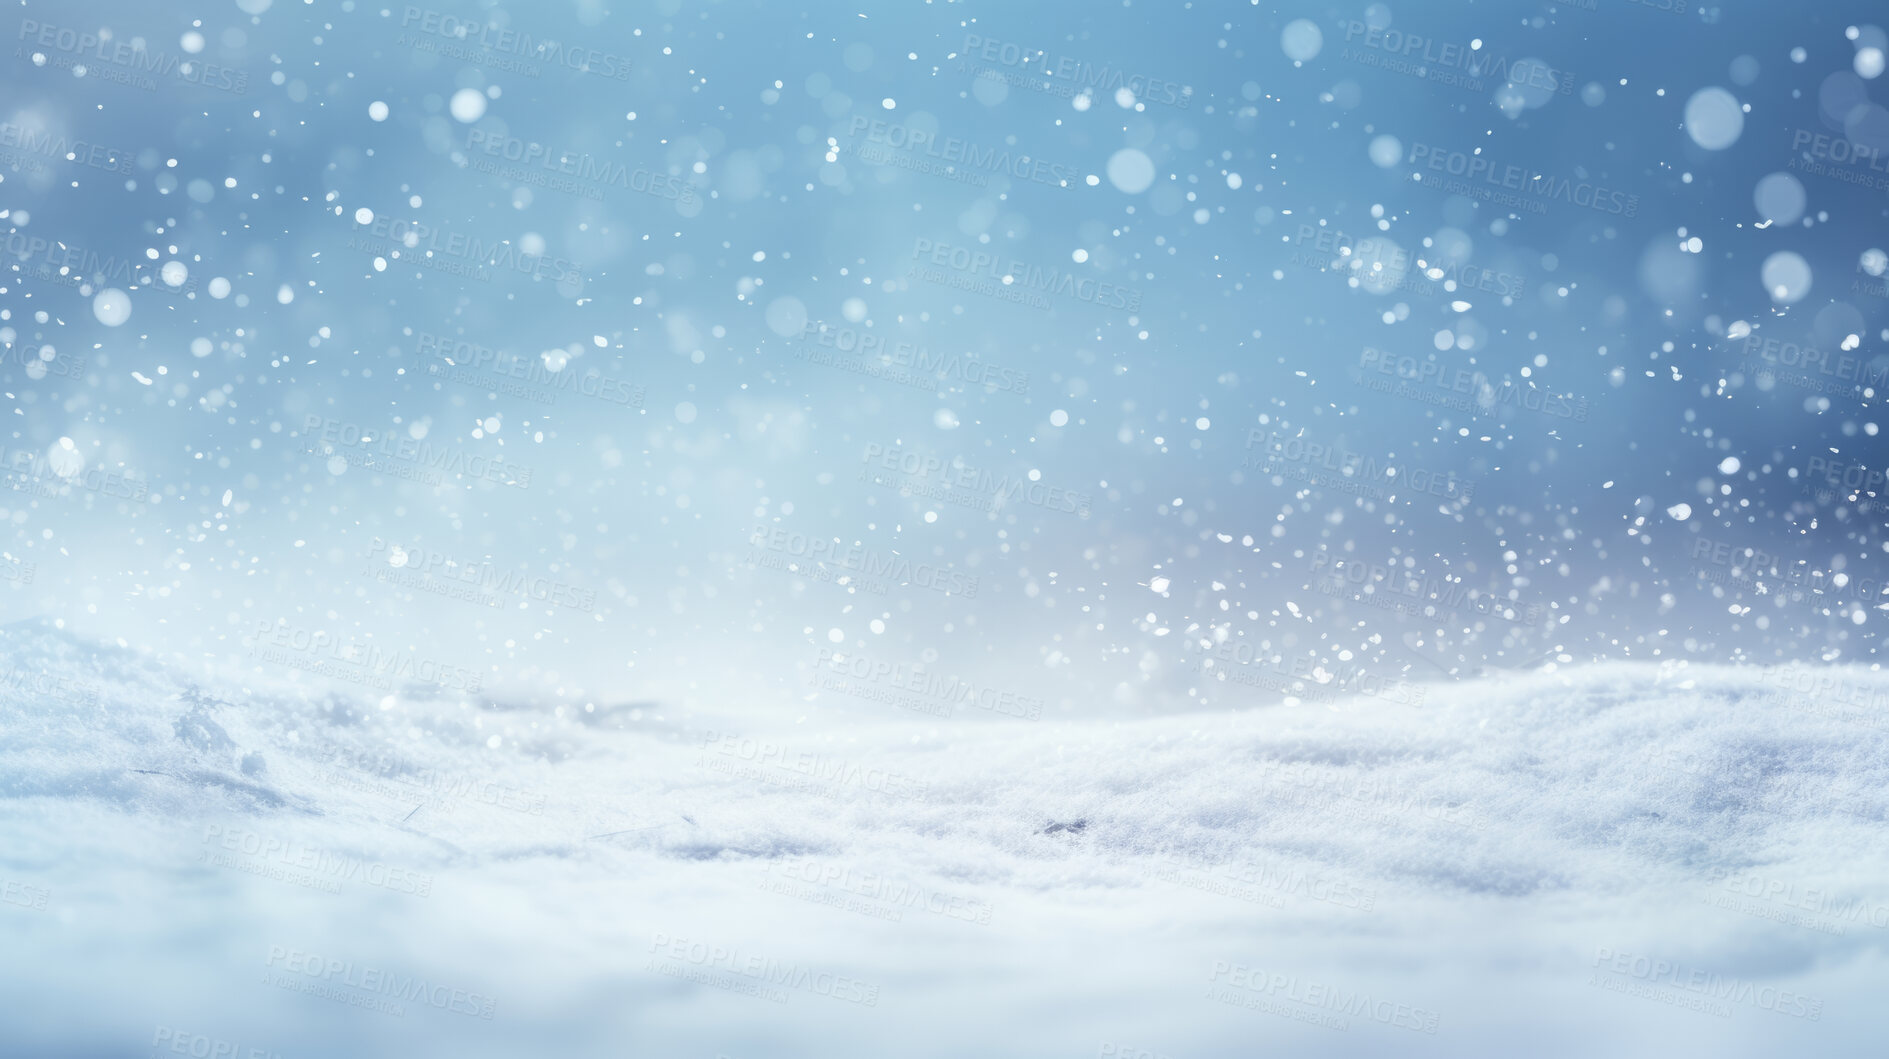 Buy stock photo Snow and winter blurred background. Christmas bokeh background or wallpaper